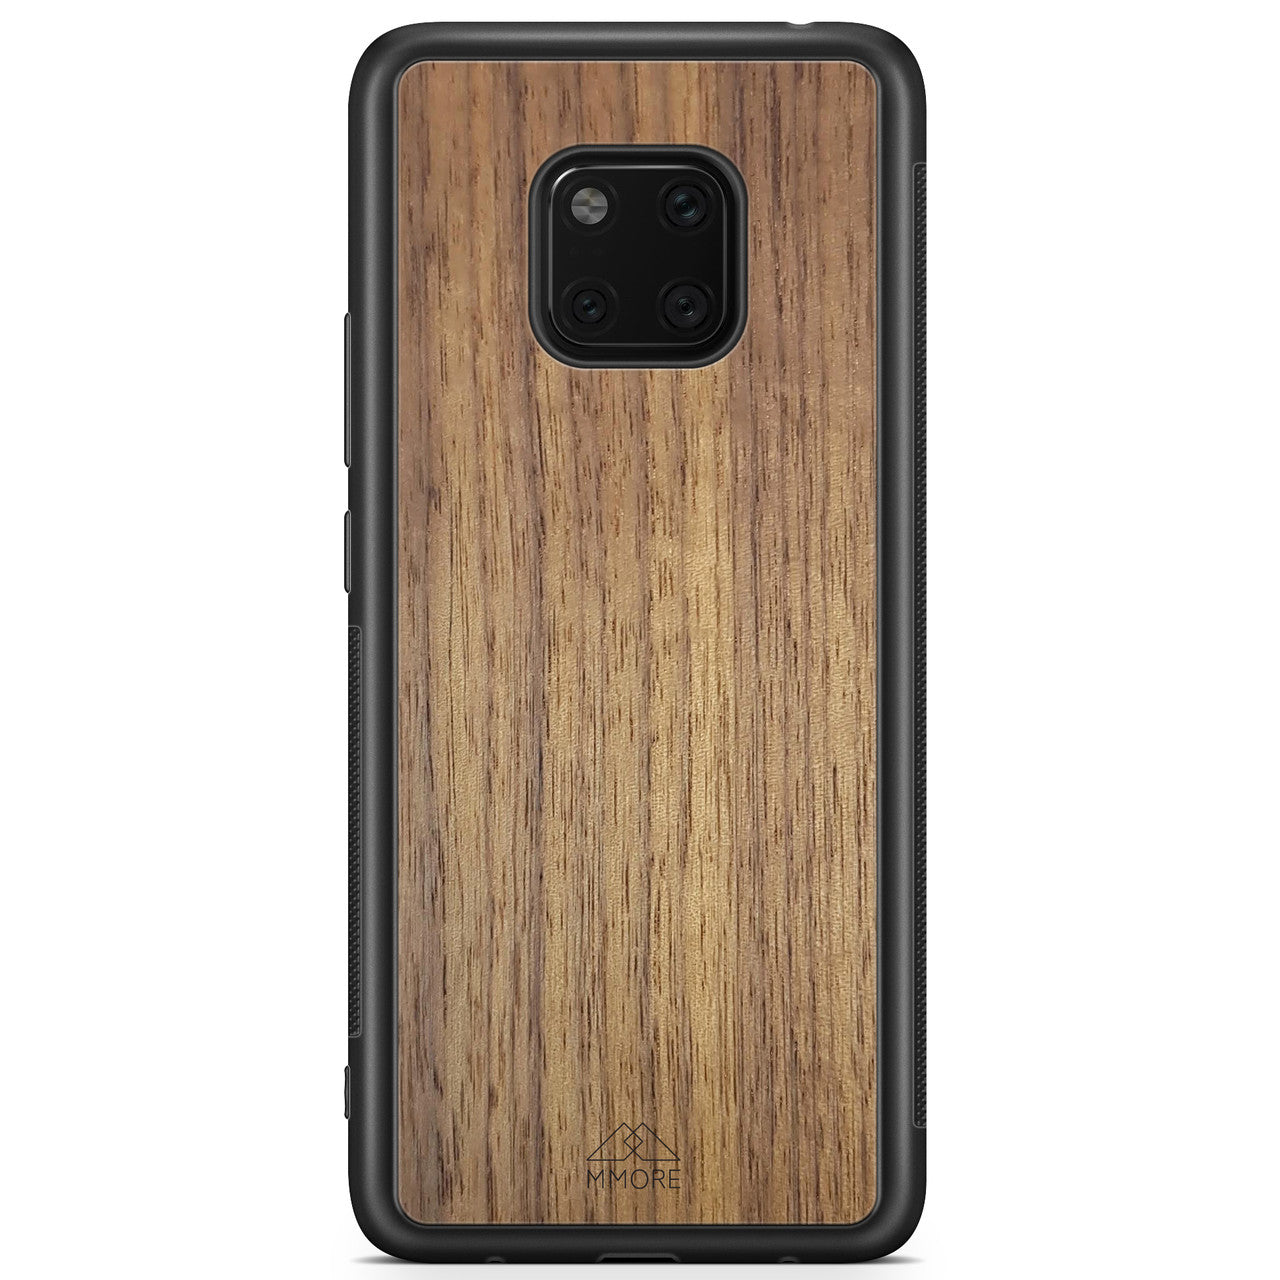 Real Wood Phone Case for Huawei Mate 20 PRO in Black Colour made from American Walnut woodAmerican Walnut Wood Phone Case Huawei Mate 20 Pro